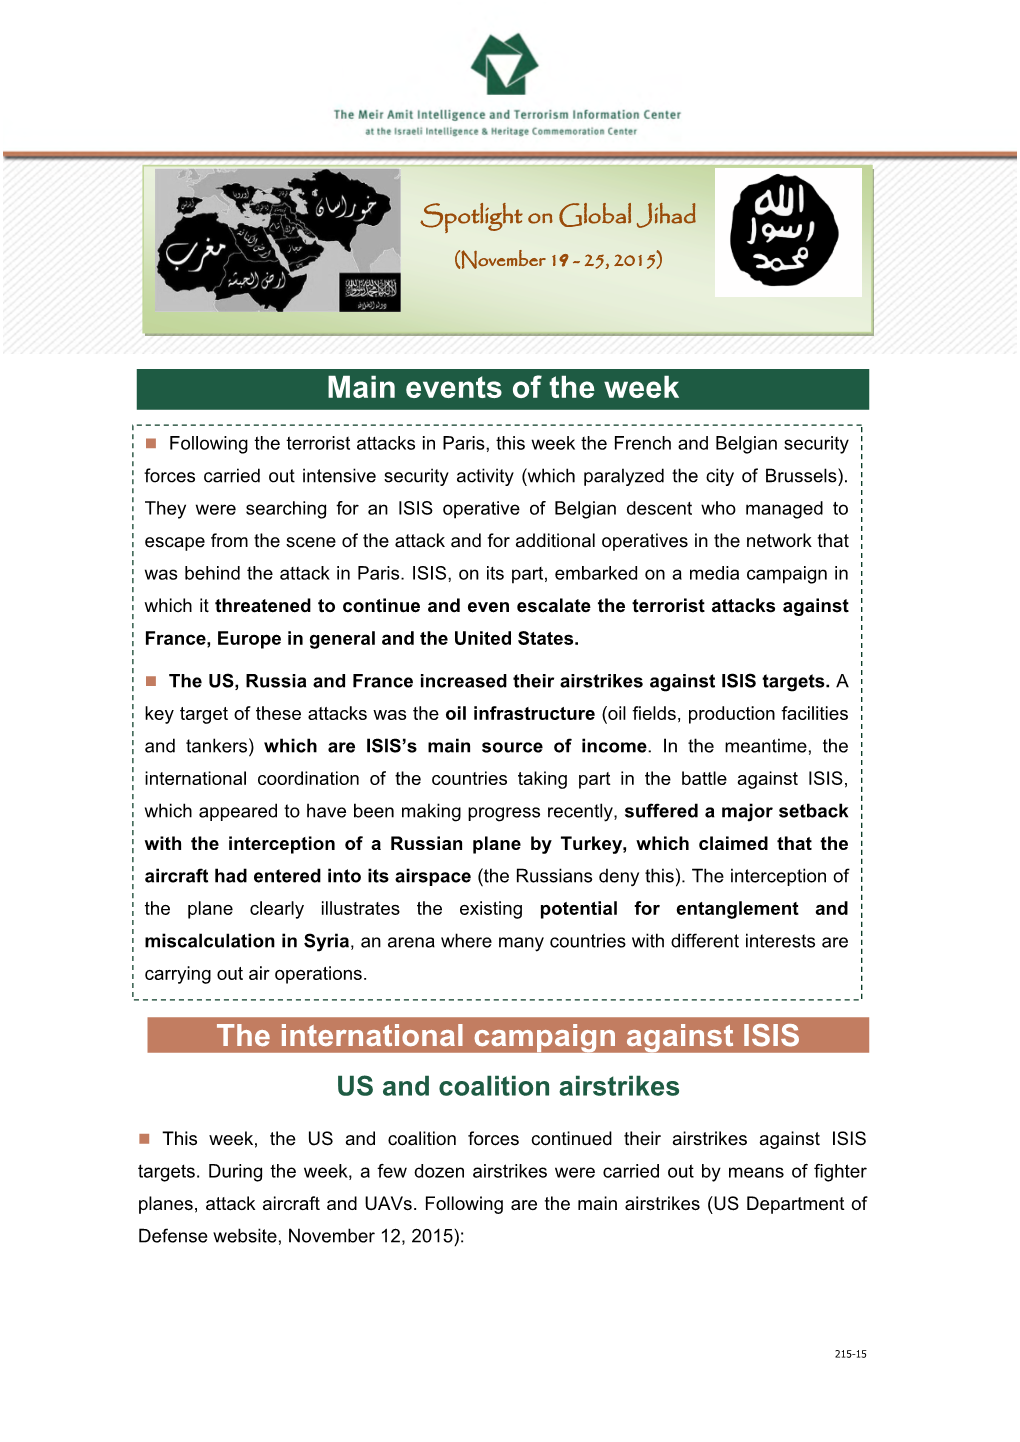 Main Events of the Week the International Campaign Against ISIS